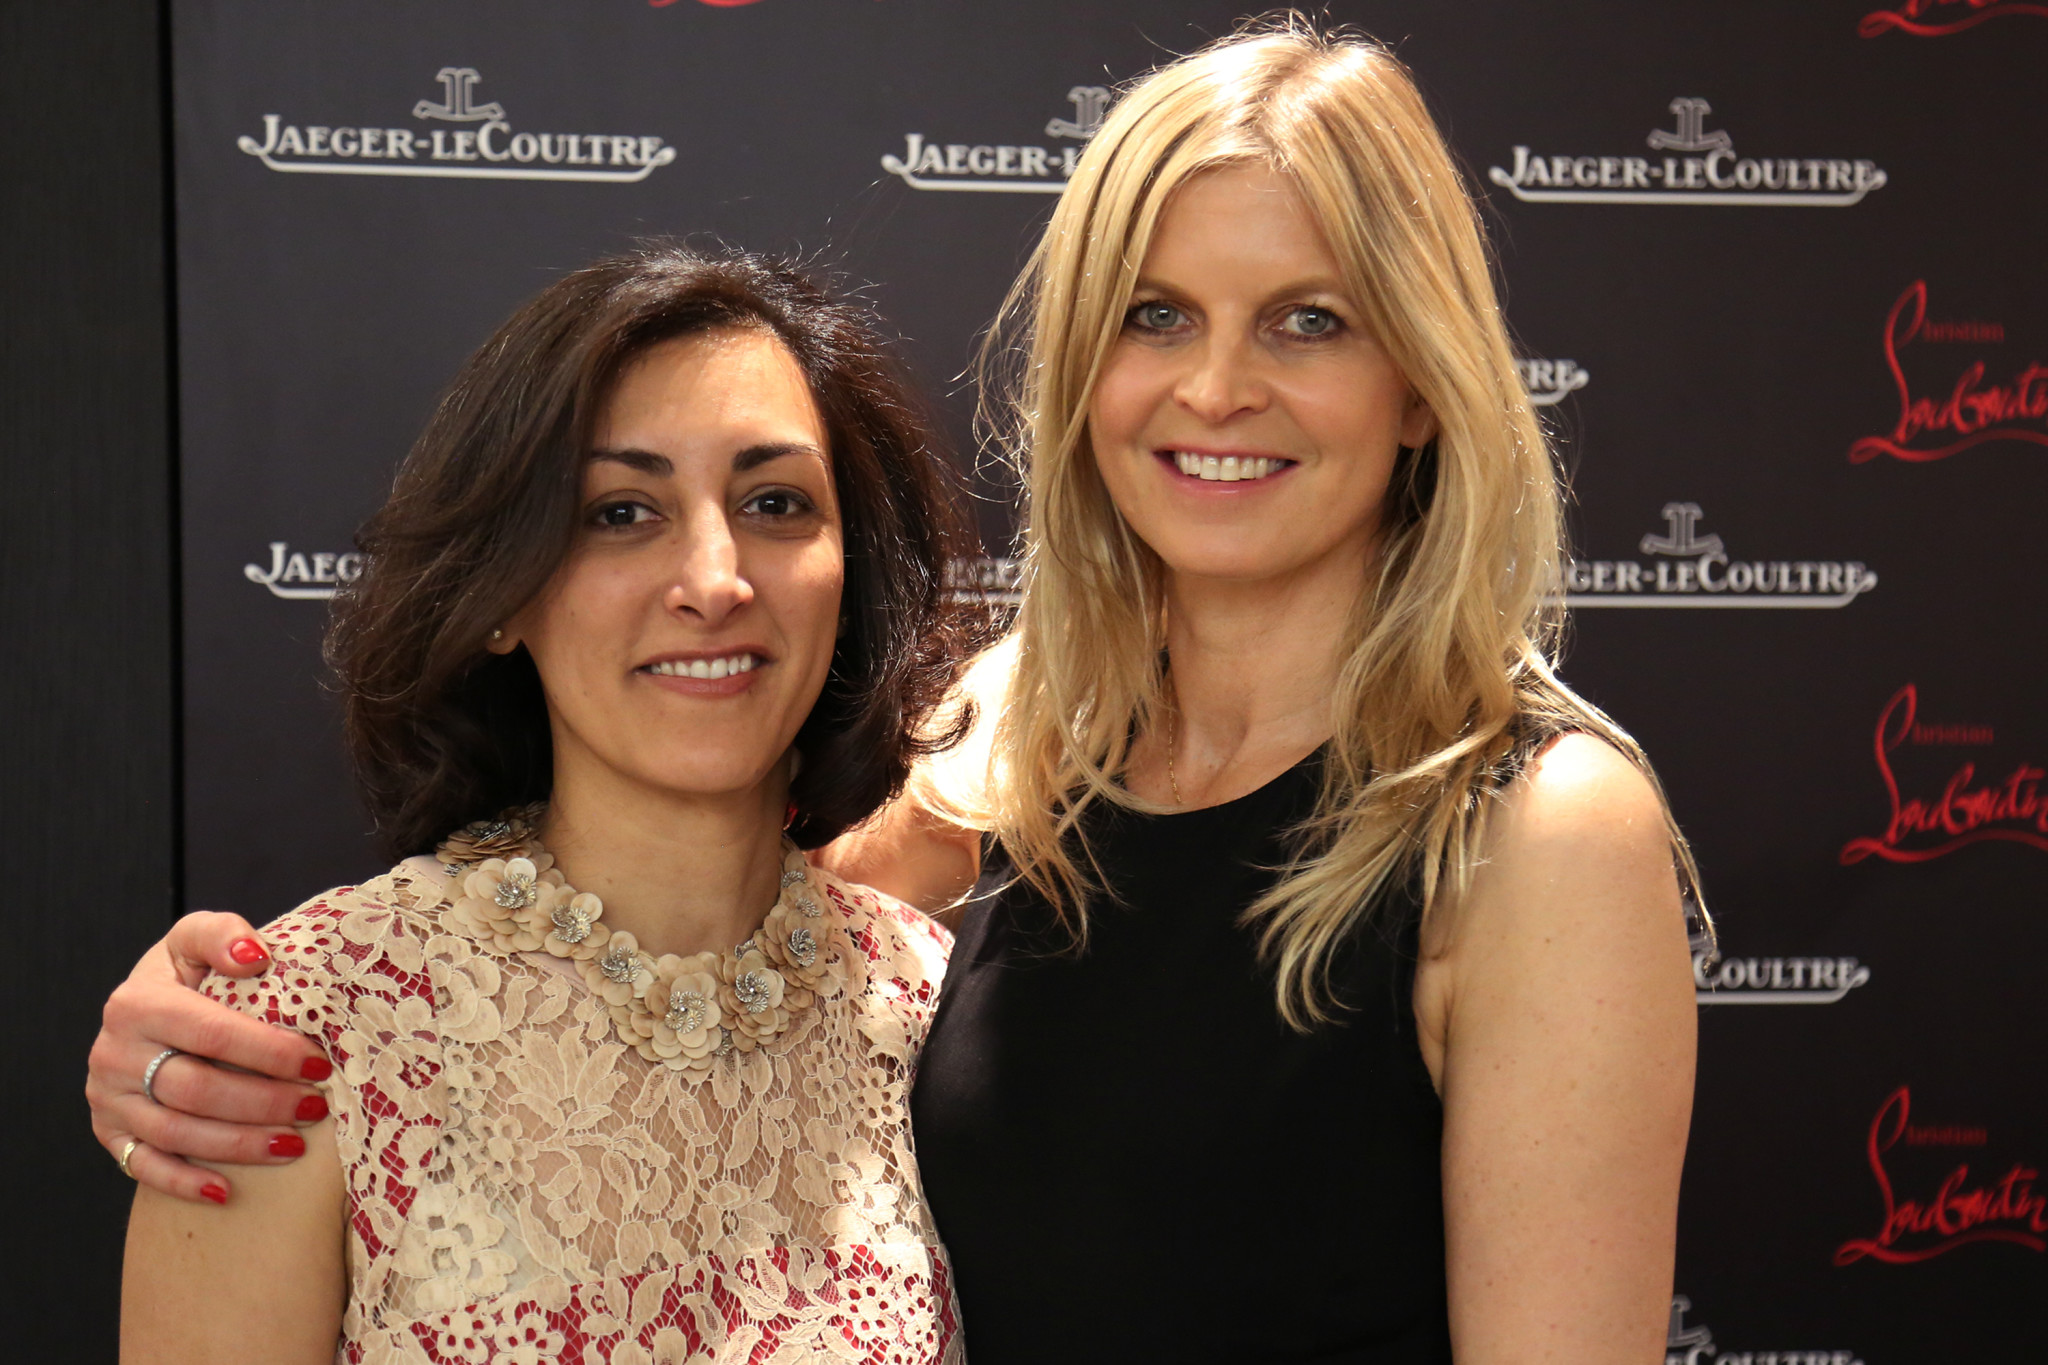 Jaeger lecoultre uk and global strategy director zahra kassim lakha adnd polo ambassador clare milford haven